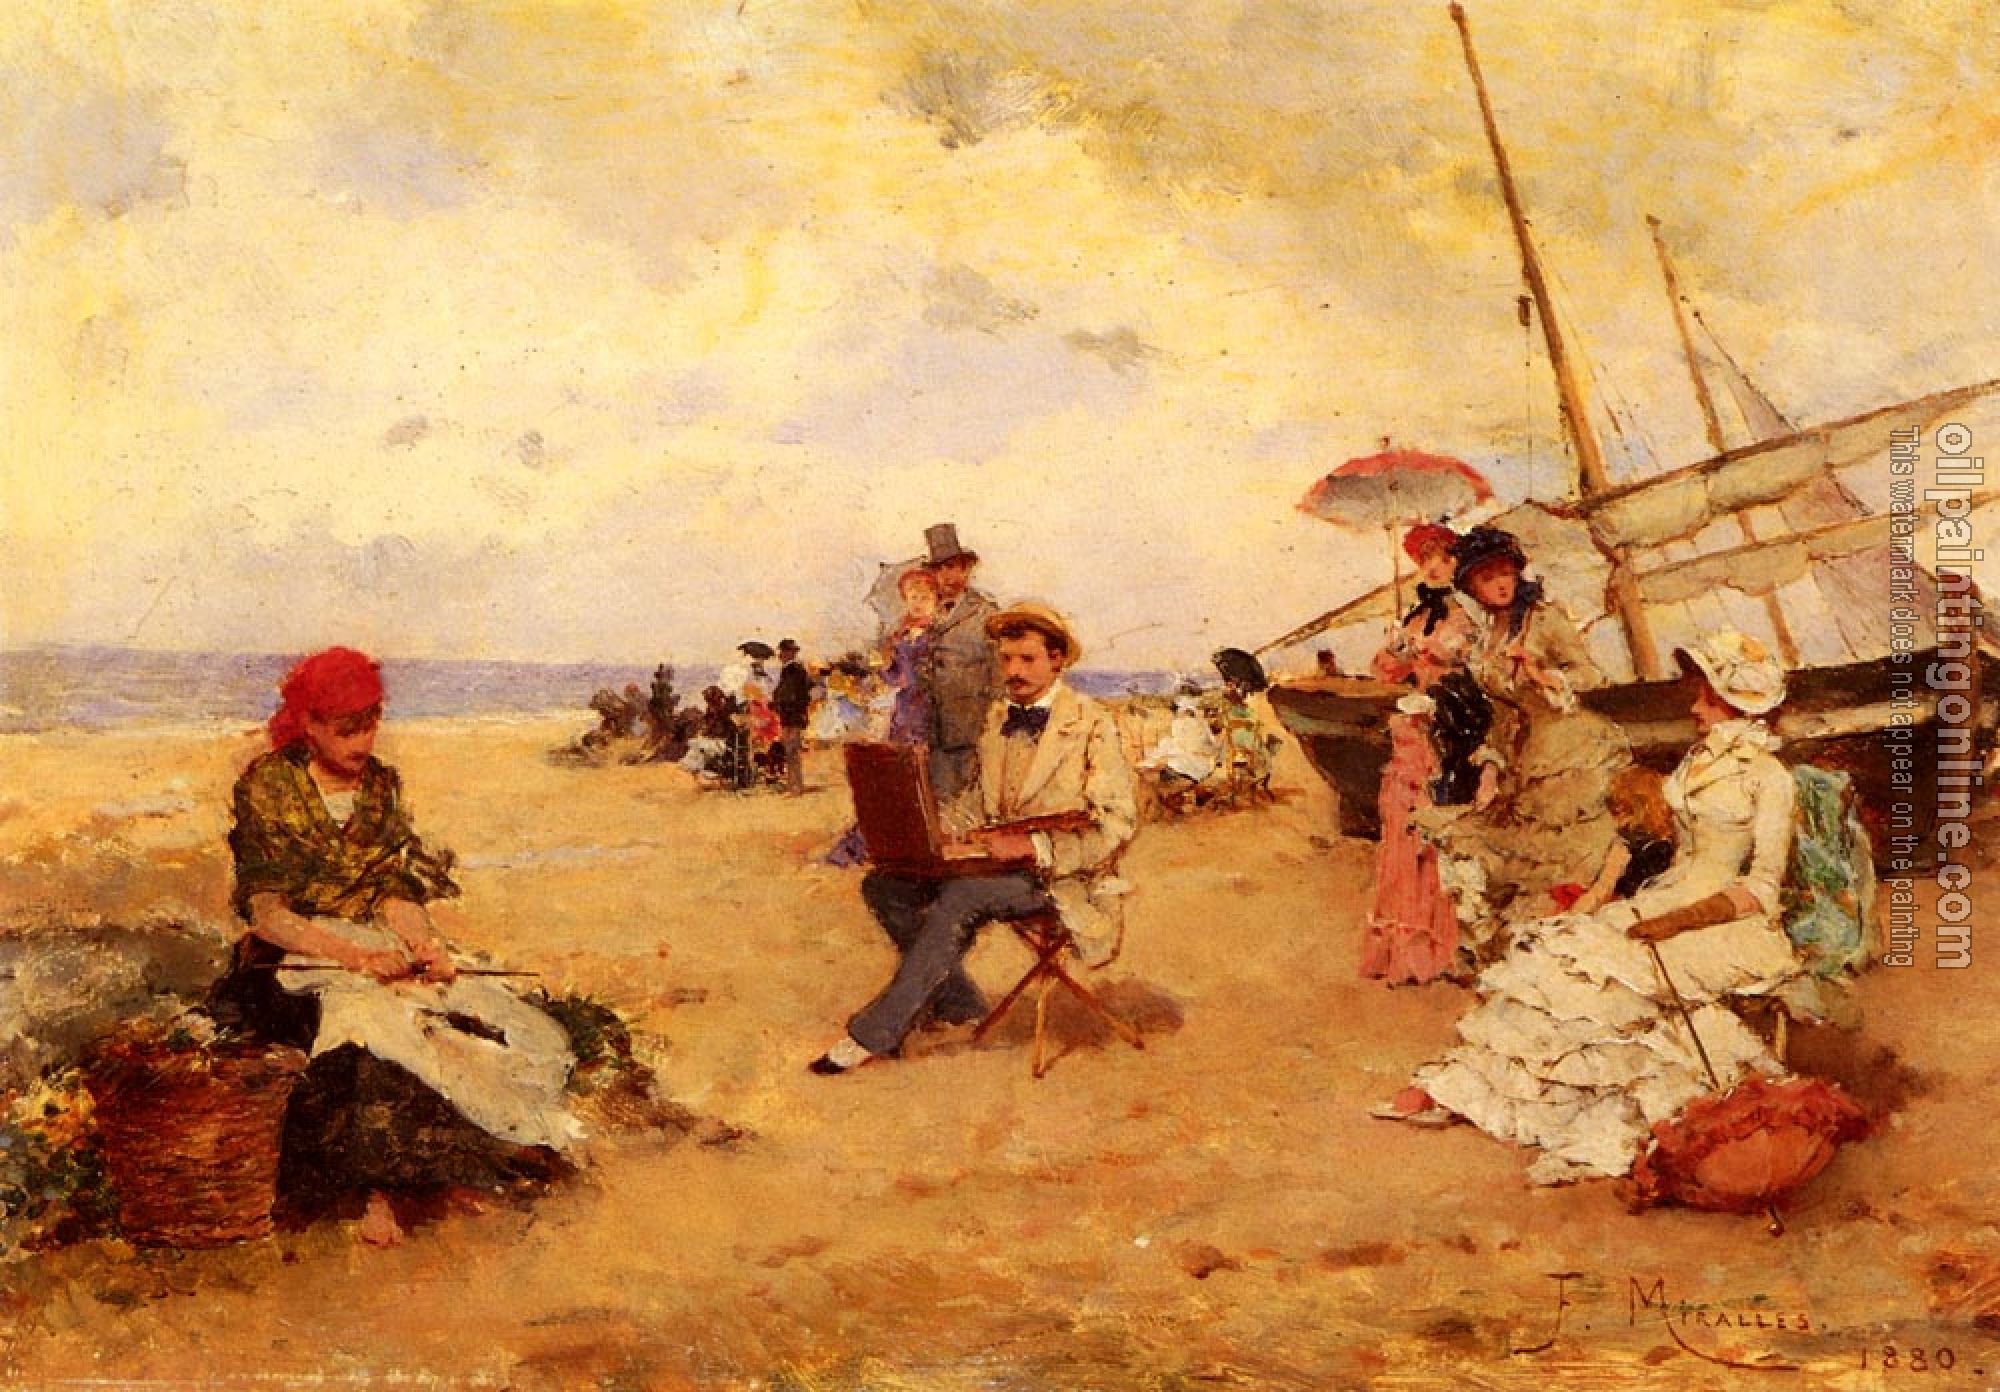 Francisco Miralles Galup - The Artist Sketching On A Beach